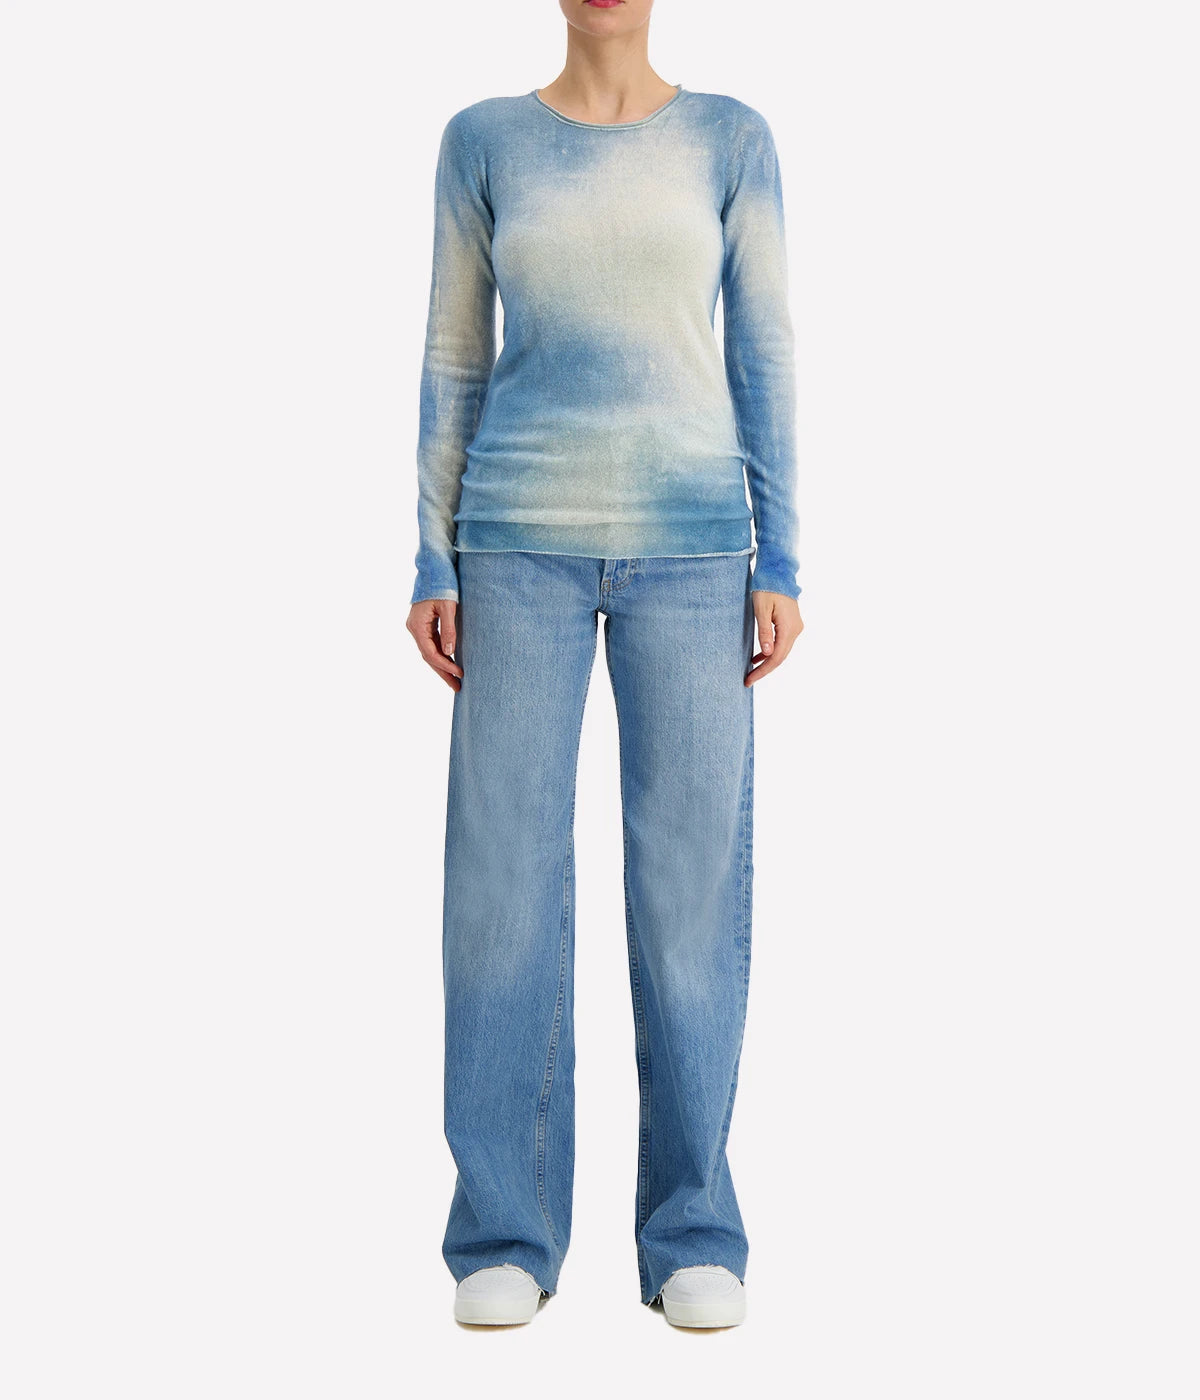 Marmo Effect Light Cashmere Round Neck in Water